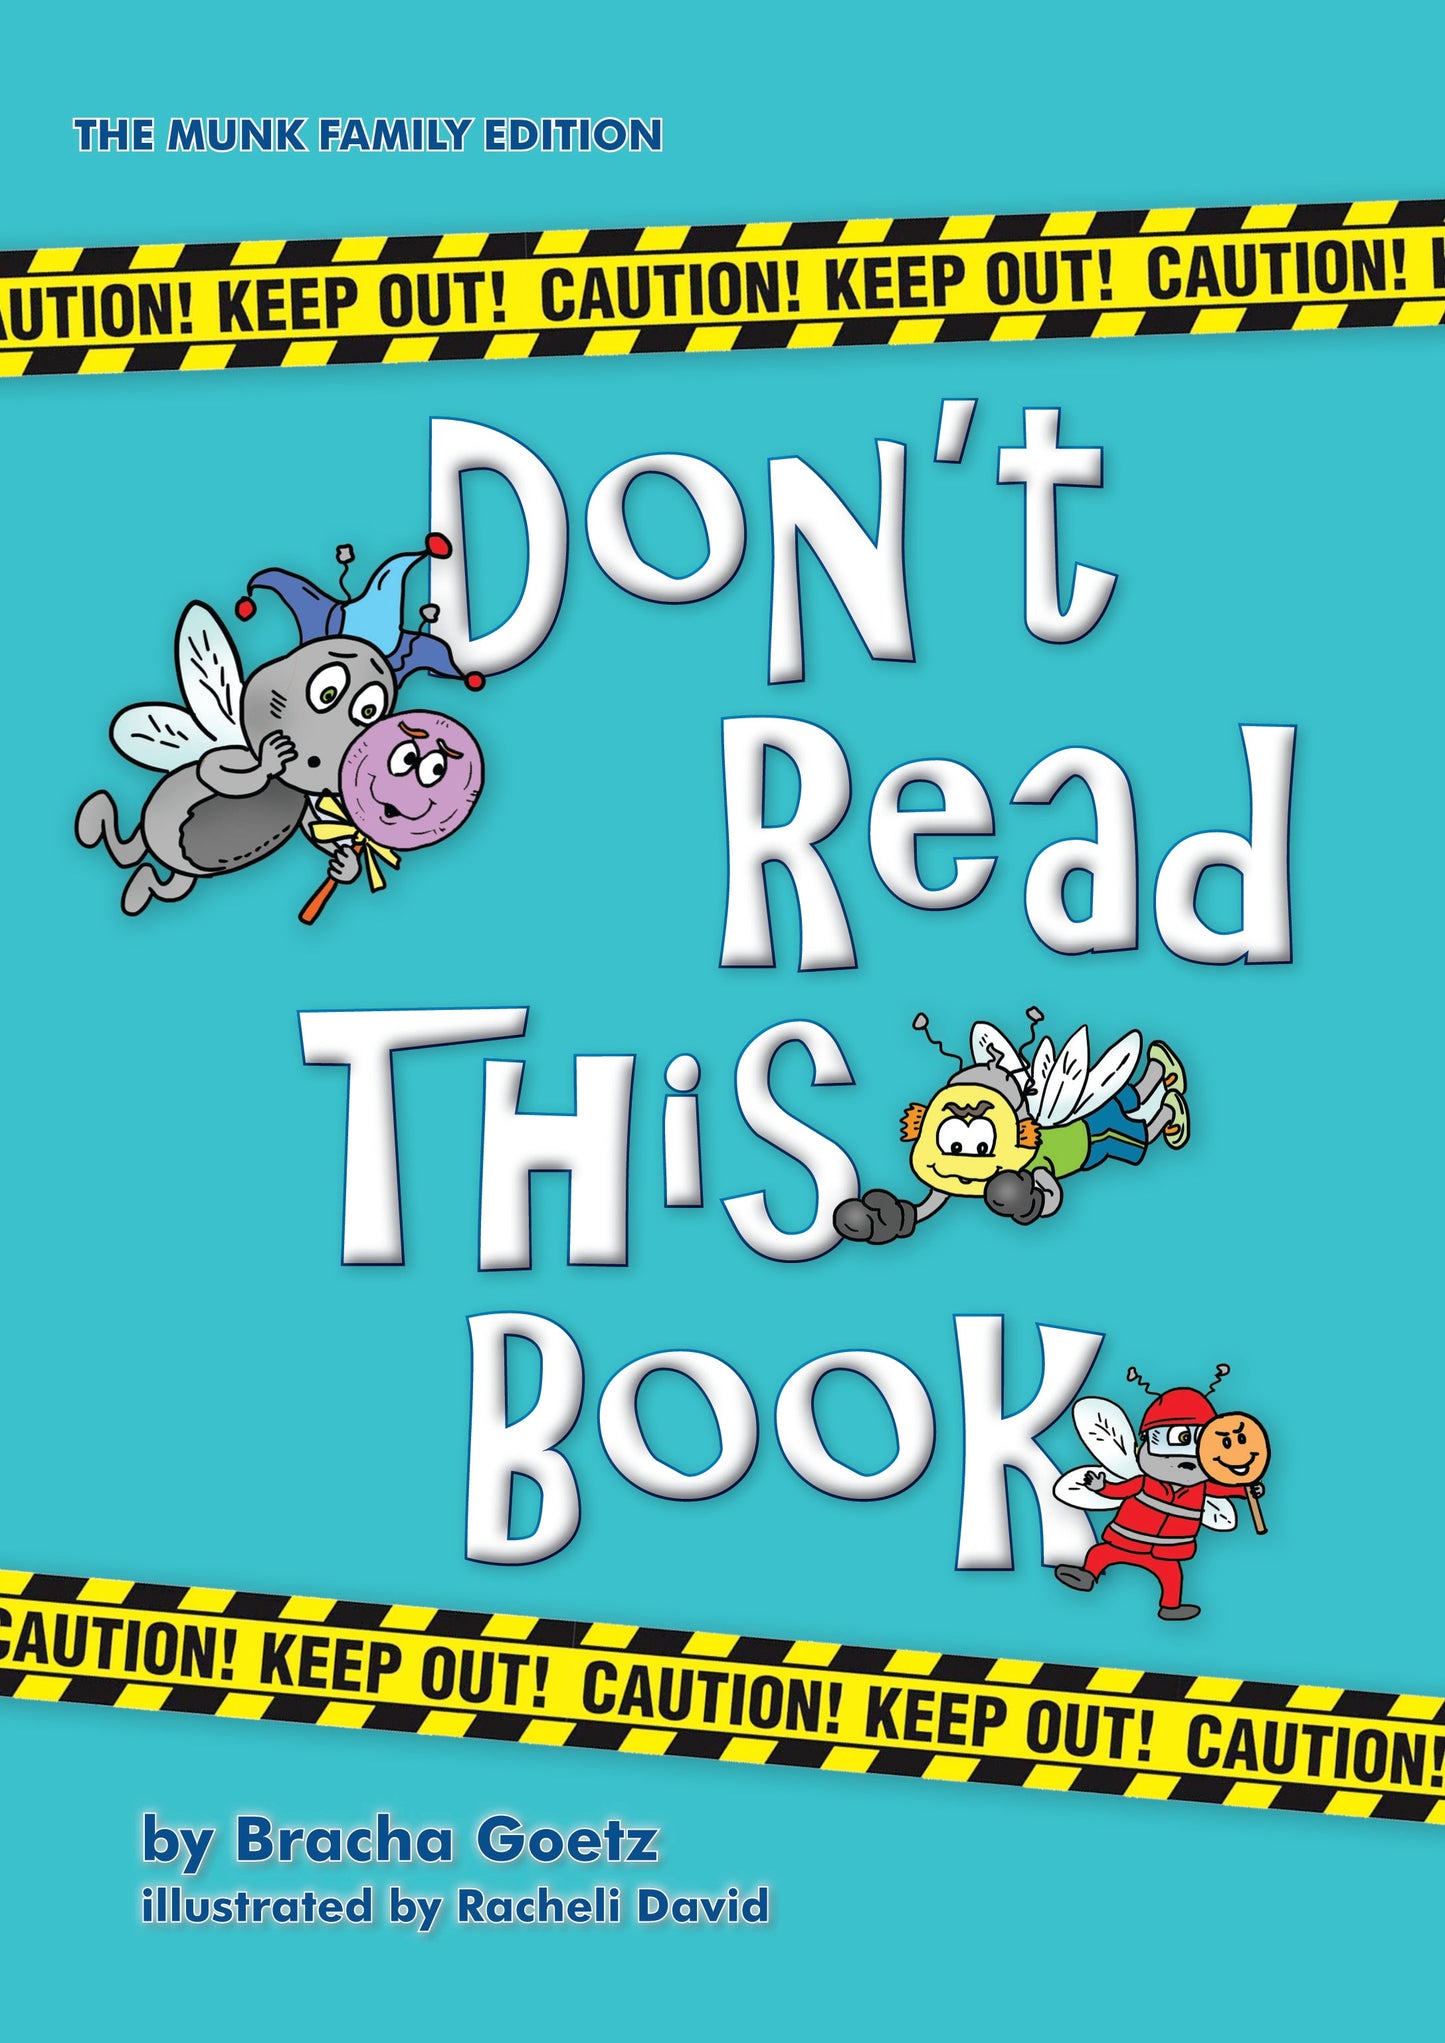 Don't Read This Book: Animated Video Download